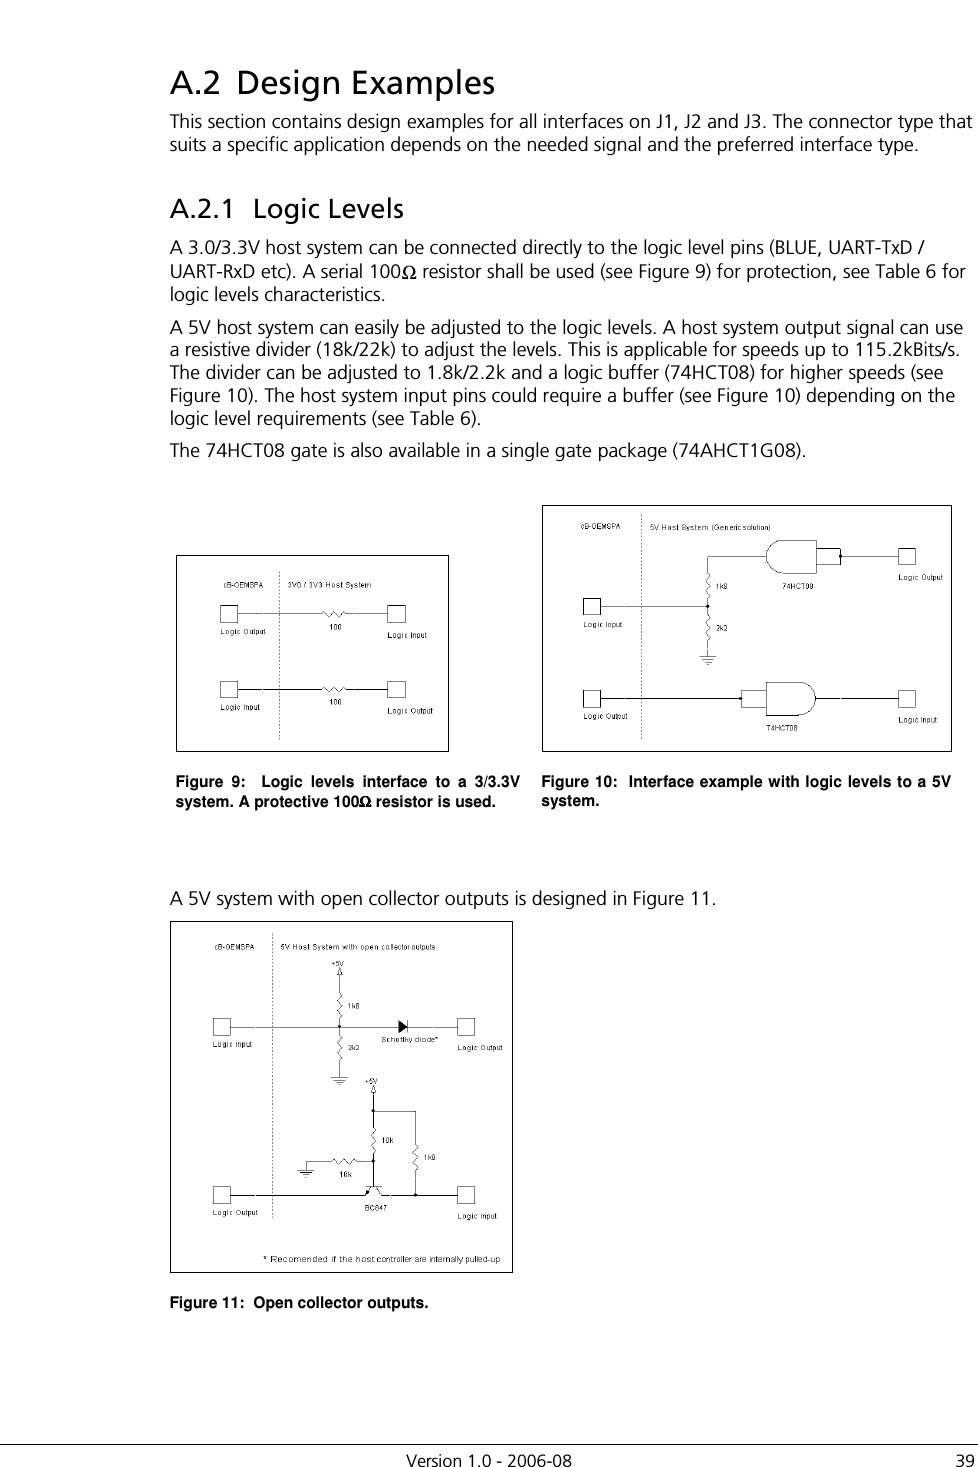          Version 1.0 - 2006-08  39 A.2  Design Examples This section contains design examples for all interfaces on J1, J2 and J3. The connector type that suits a specific application depends on the needed signal and the preferred interface type. A.2.1  Logic Levels A 3.0/3.3V host system can be connected directly to the logic level pins (BLUE, UART-TxD / UART-RxD etc). A serial 100Ω resistor shall be used (see Figure 9) for protection, see Table 6 for logic levels characteristics. A 5V host system can easily be adjusted to the logic levels. A host system output signal can use a resistive divider (18k/22k) to adjust the levels. This is applicable for speeds up to 115.2kBits/s. The divider can be adjusted to 1.8k/2.2k and a logic buffer (74HCT08) for higher speeds (see Figure 10). The host system input pins could require a buffer (see Figure 10) depending on the logic level requirements (see Table 6). The 74HCT08 gate is also available in a single gate package (74AHCT1G08).    Figure  9:    Logic  levels  interface  to  a  3/3.3V system. A protective 100ΩΩΩΩ resistor is used. Figure 10:  Interface example with logic levels to a 5V system.   A 5V system with open collector outputs is designed in Figure 11.  Figure 11:  Open collector outputs. 